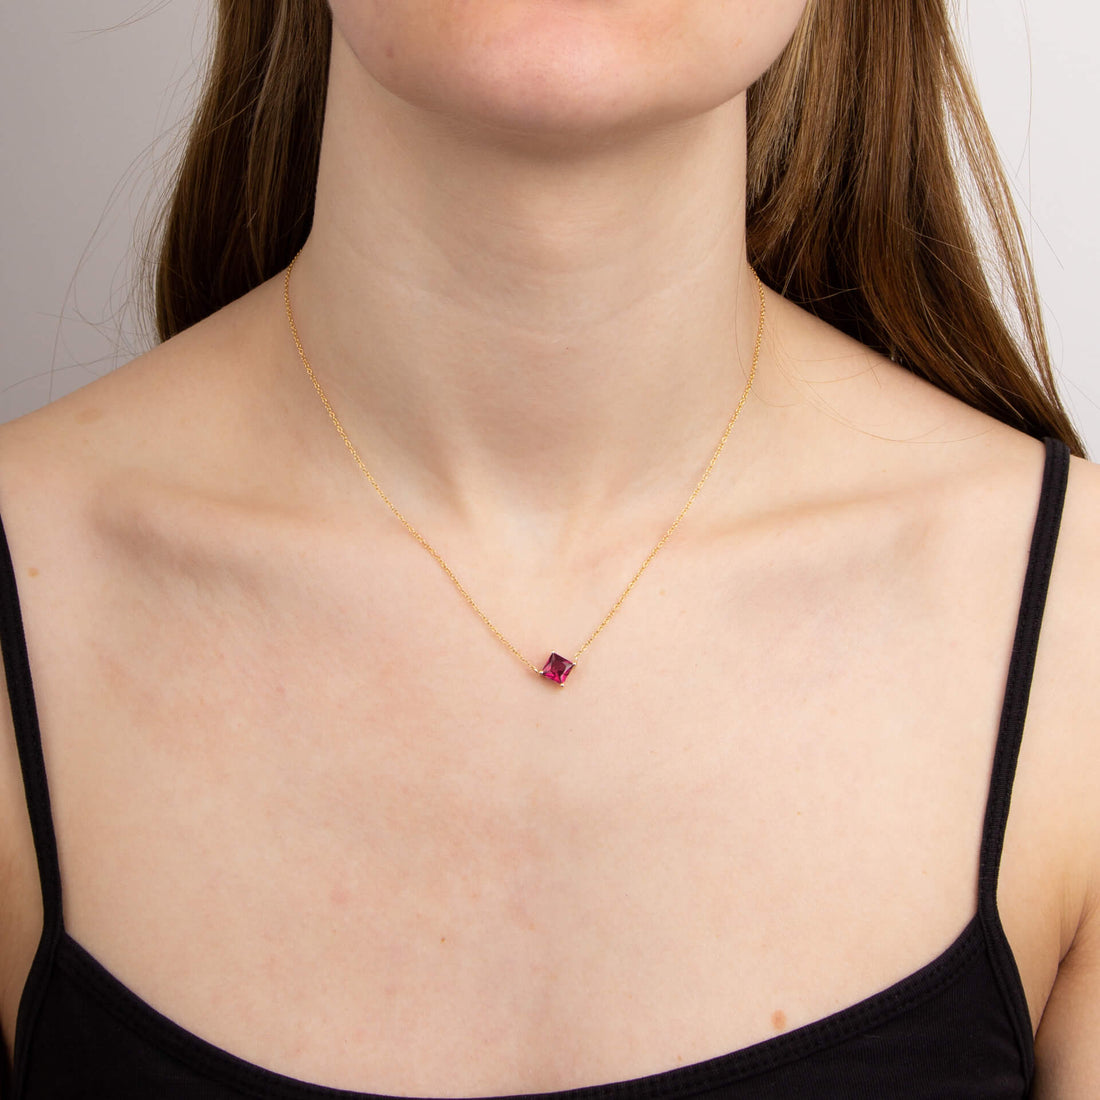 Princess Cut Necklace with Lab Created Ruby in 9ct Yellow Gold - Robert Anthony Jewellers, Edinburgh